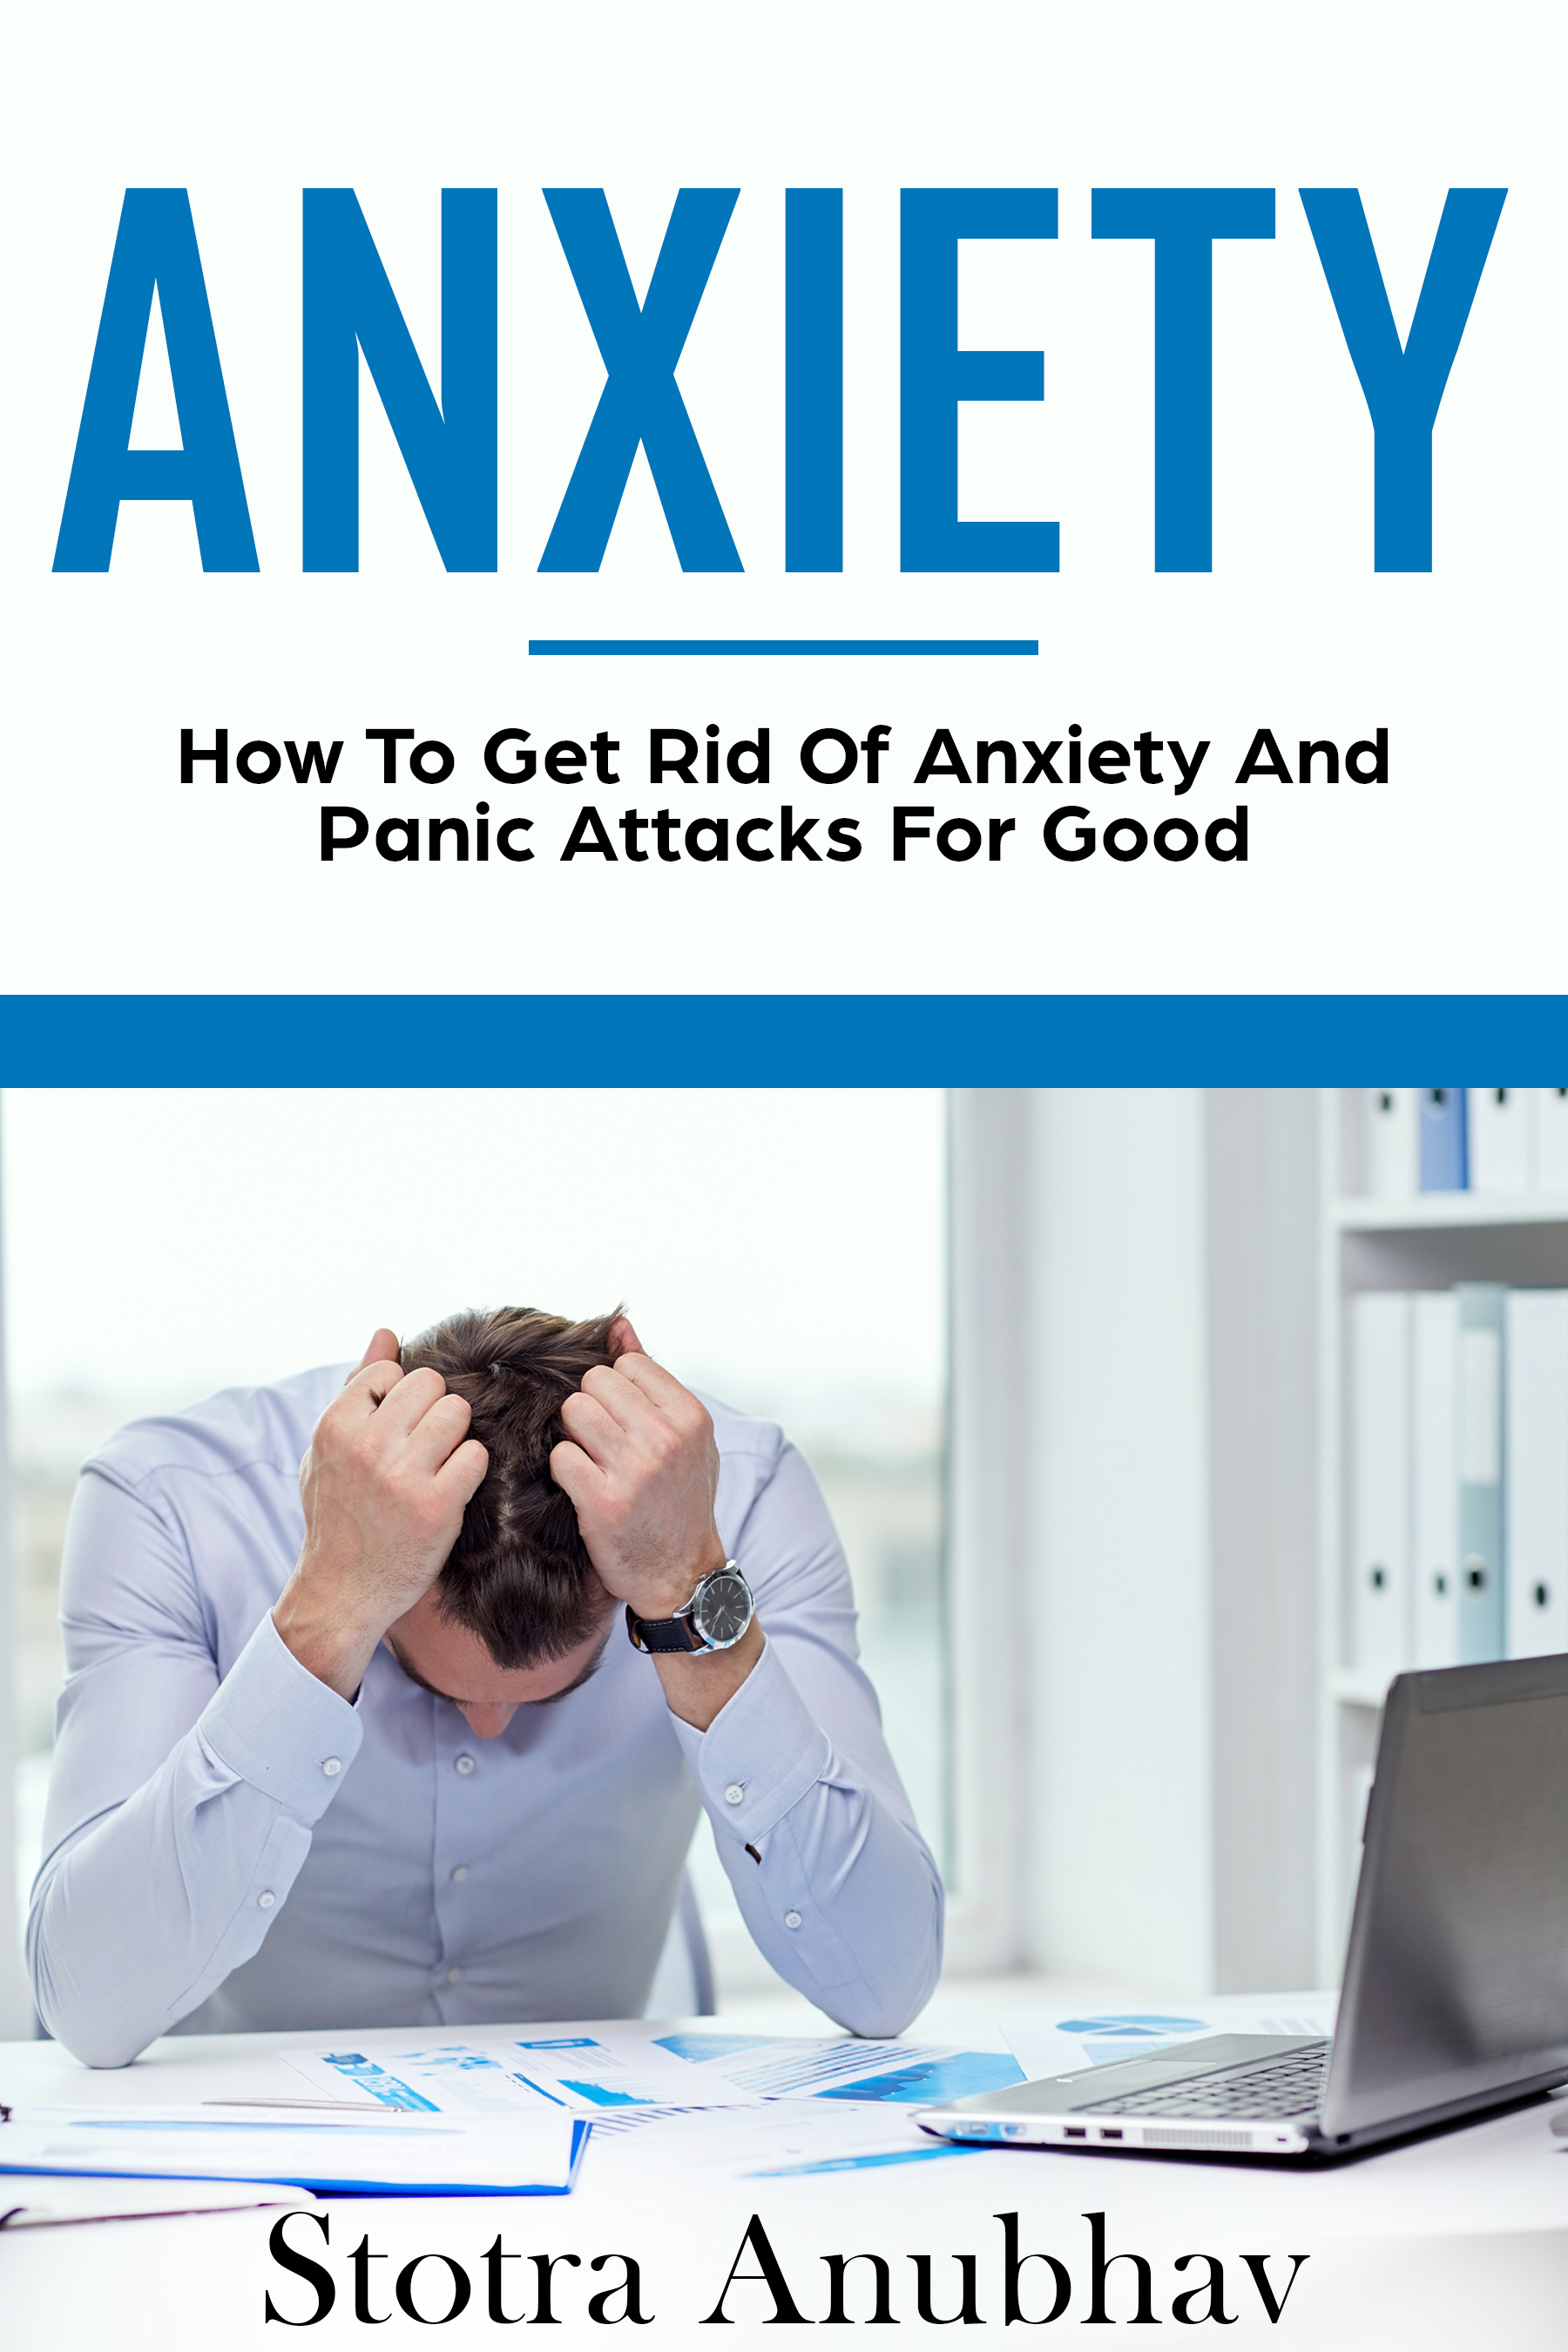 FREE: Anxiety: How To Get Rid Of Anxiety And Panic Attacks For Good by Stotra Anubhav